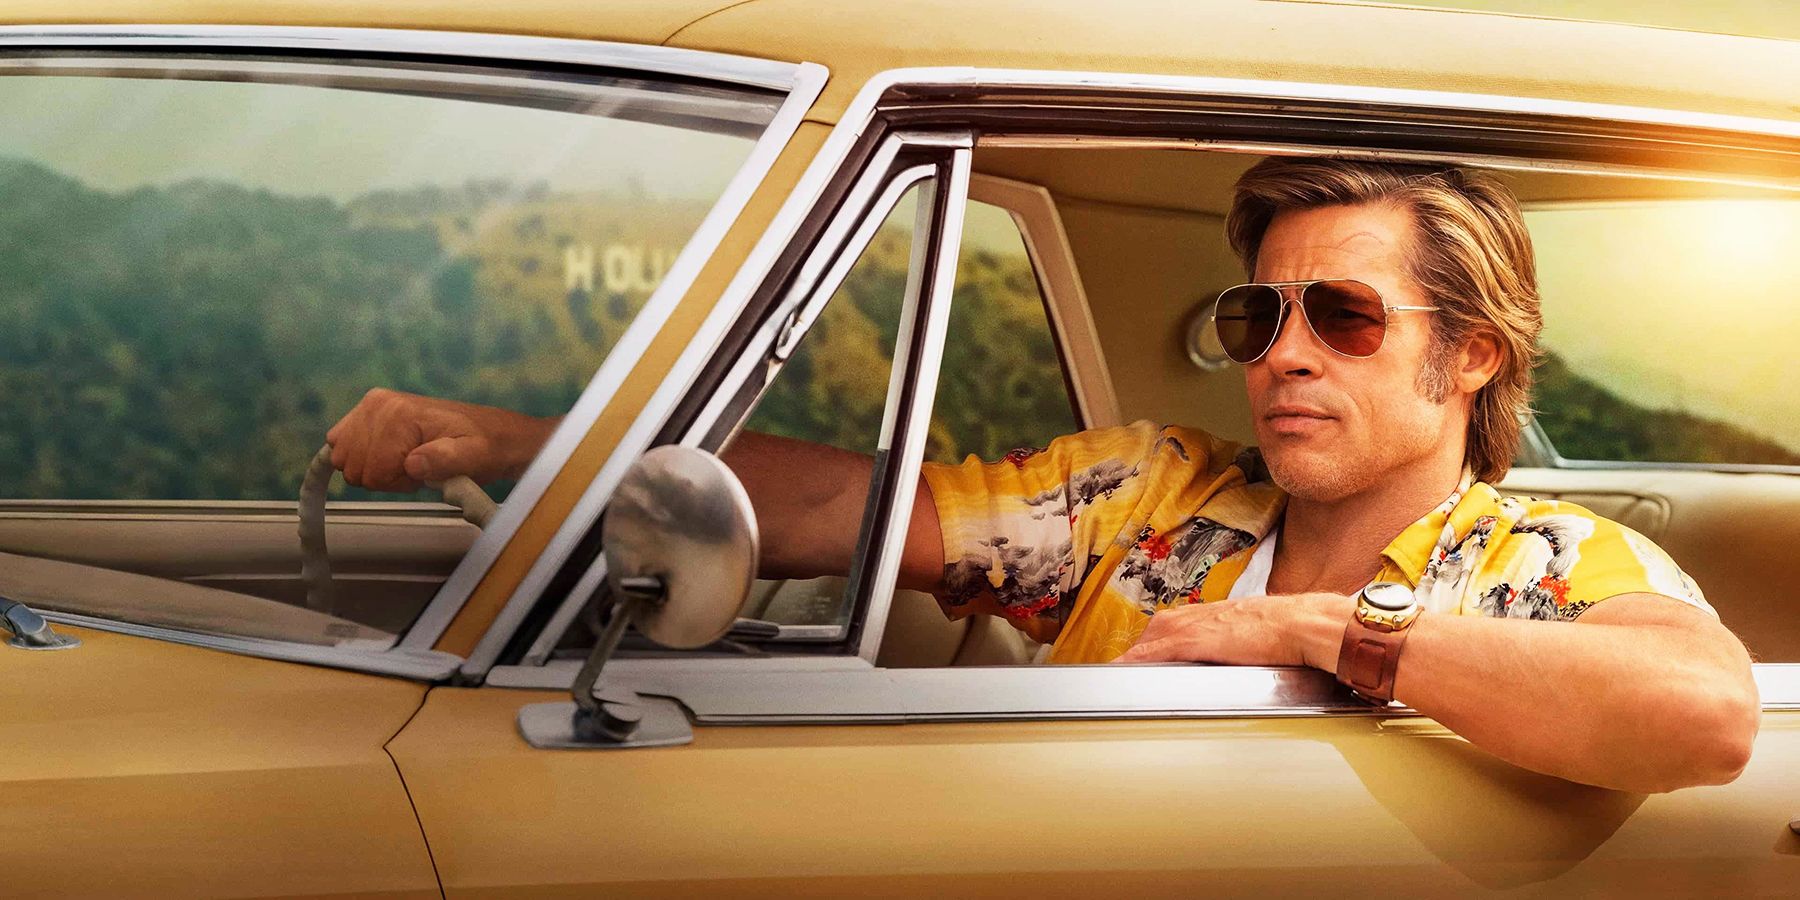 Is Once Upon A Time In Hollywood On Netflix, Hulu Or Prime?